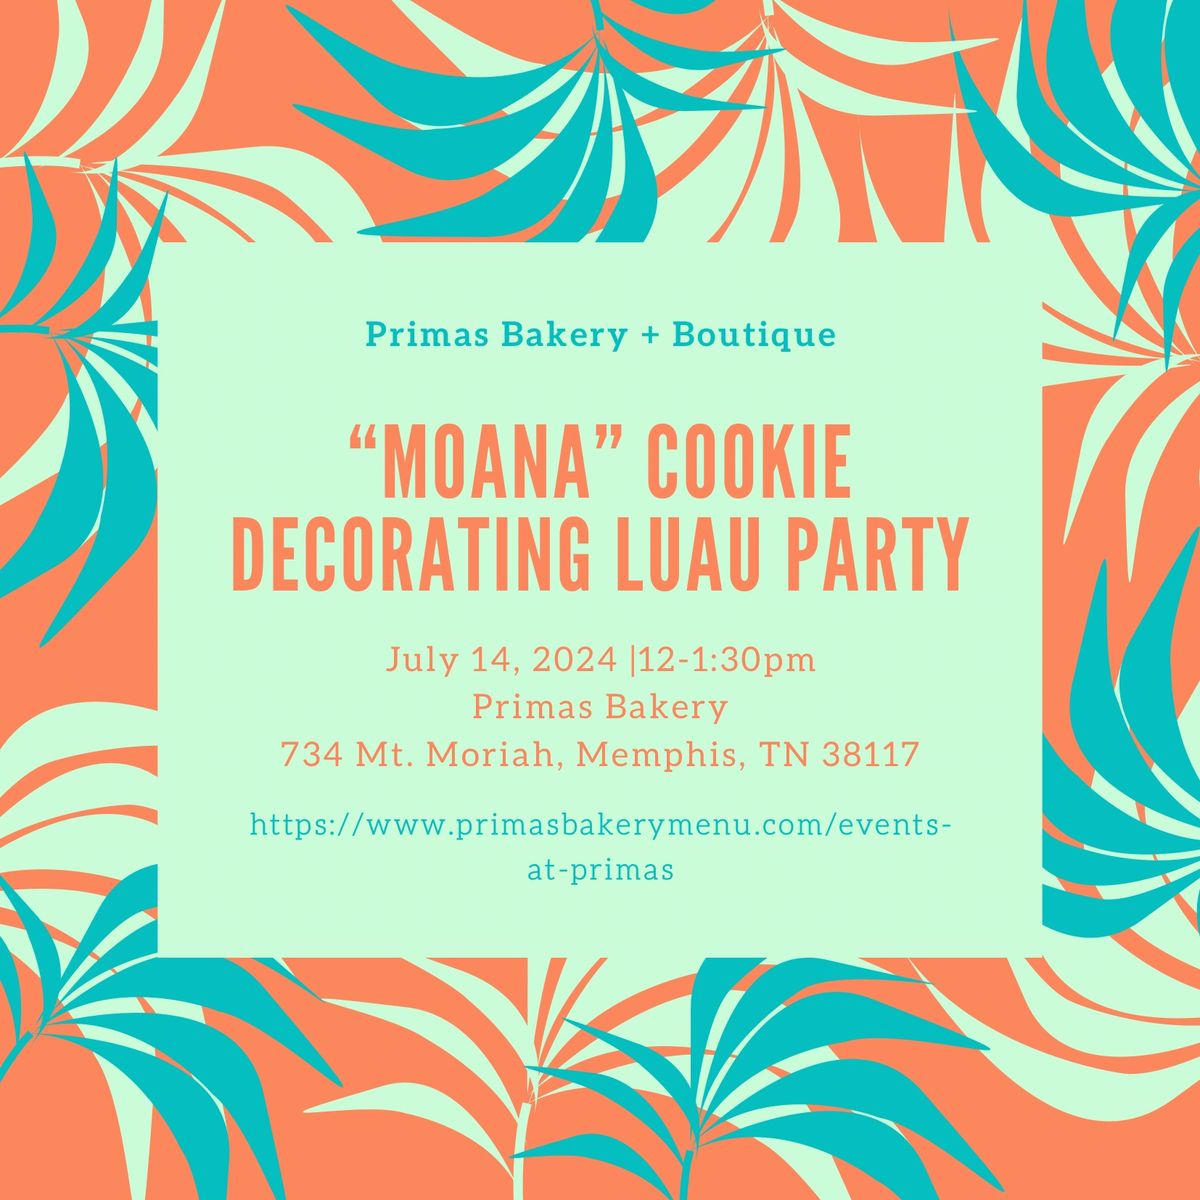 Moana Cookie Decorating Luau Party